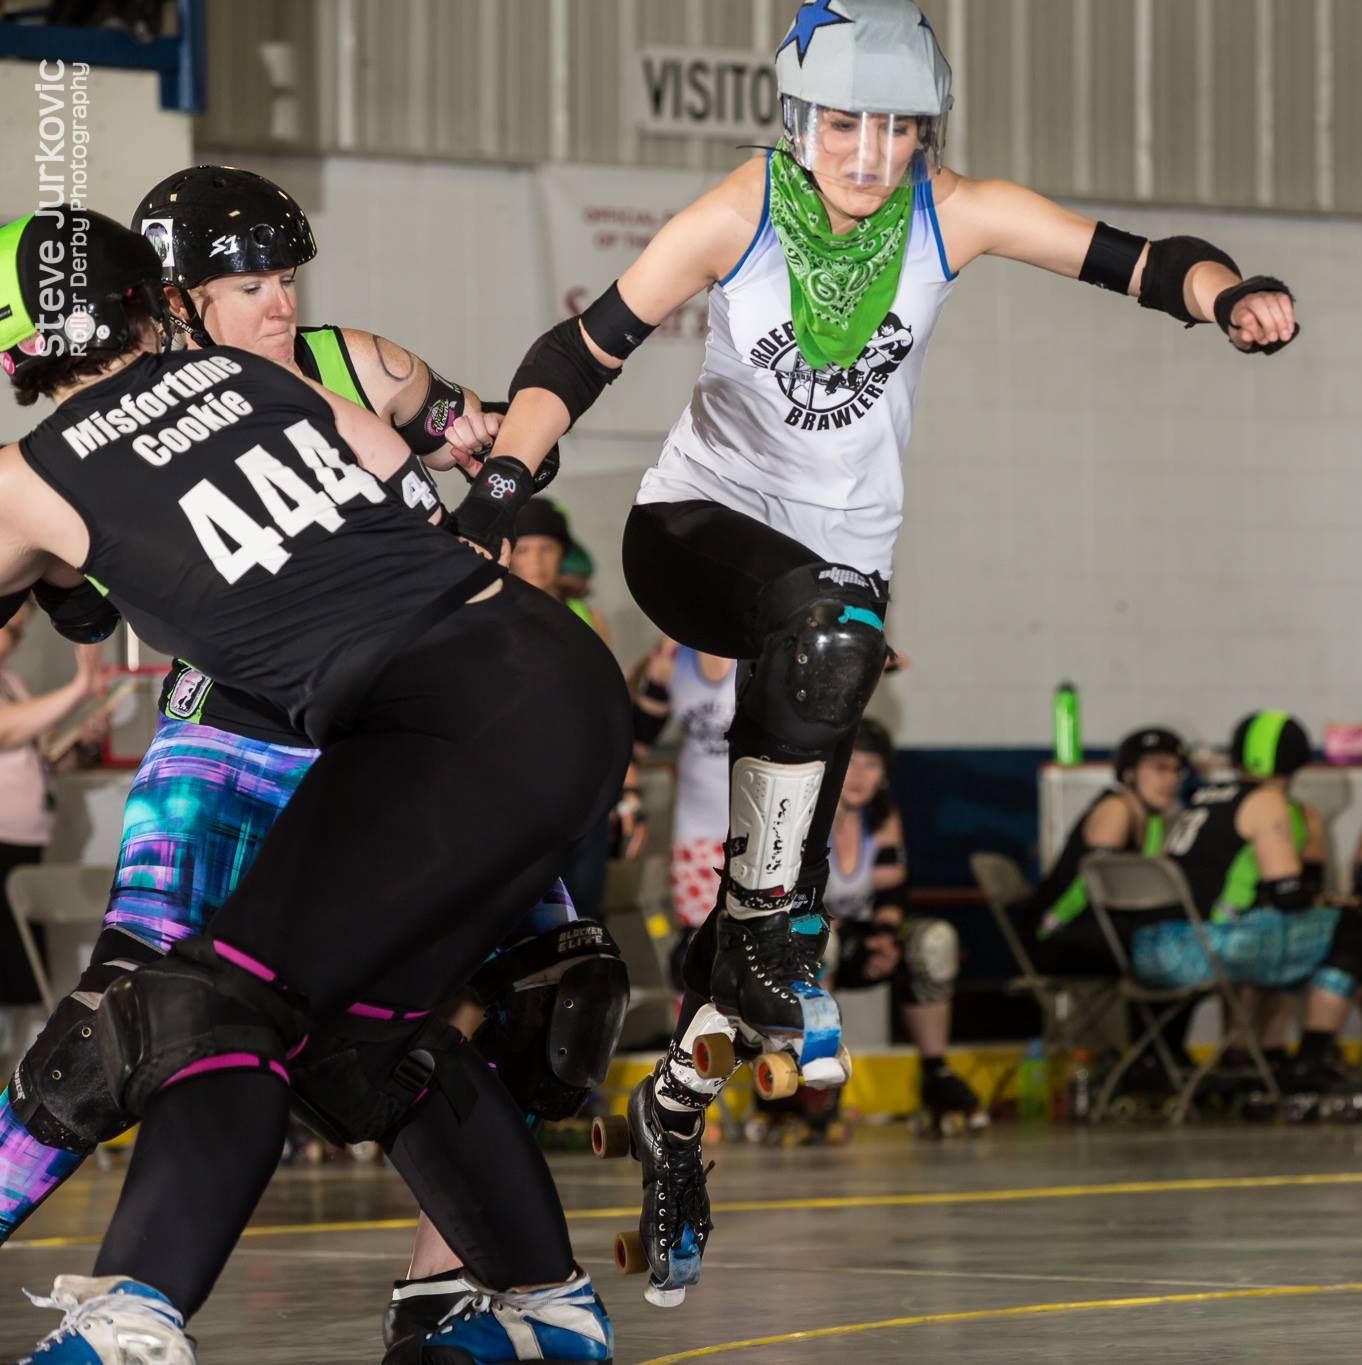 Kate playing roller derby, jumping the apex as a jammer